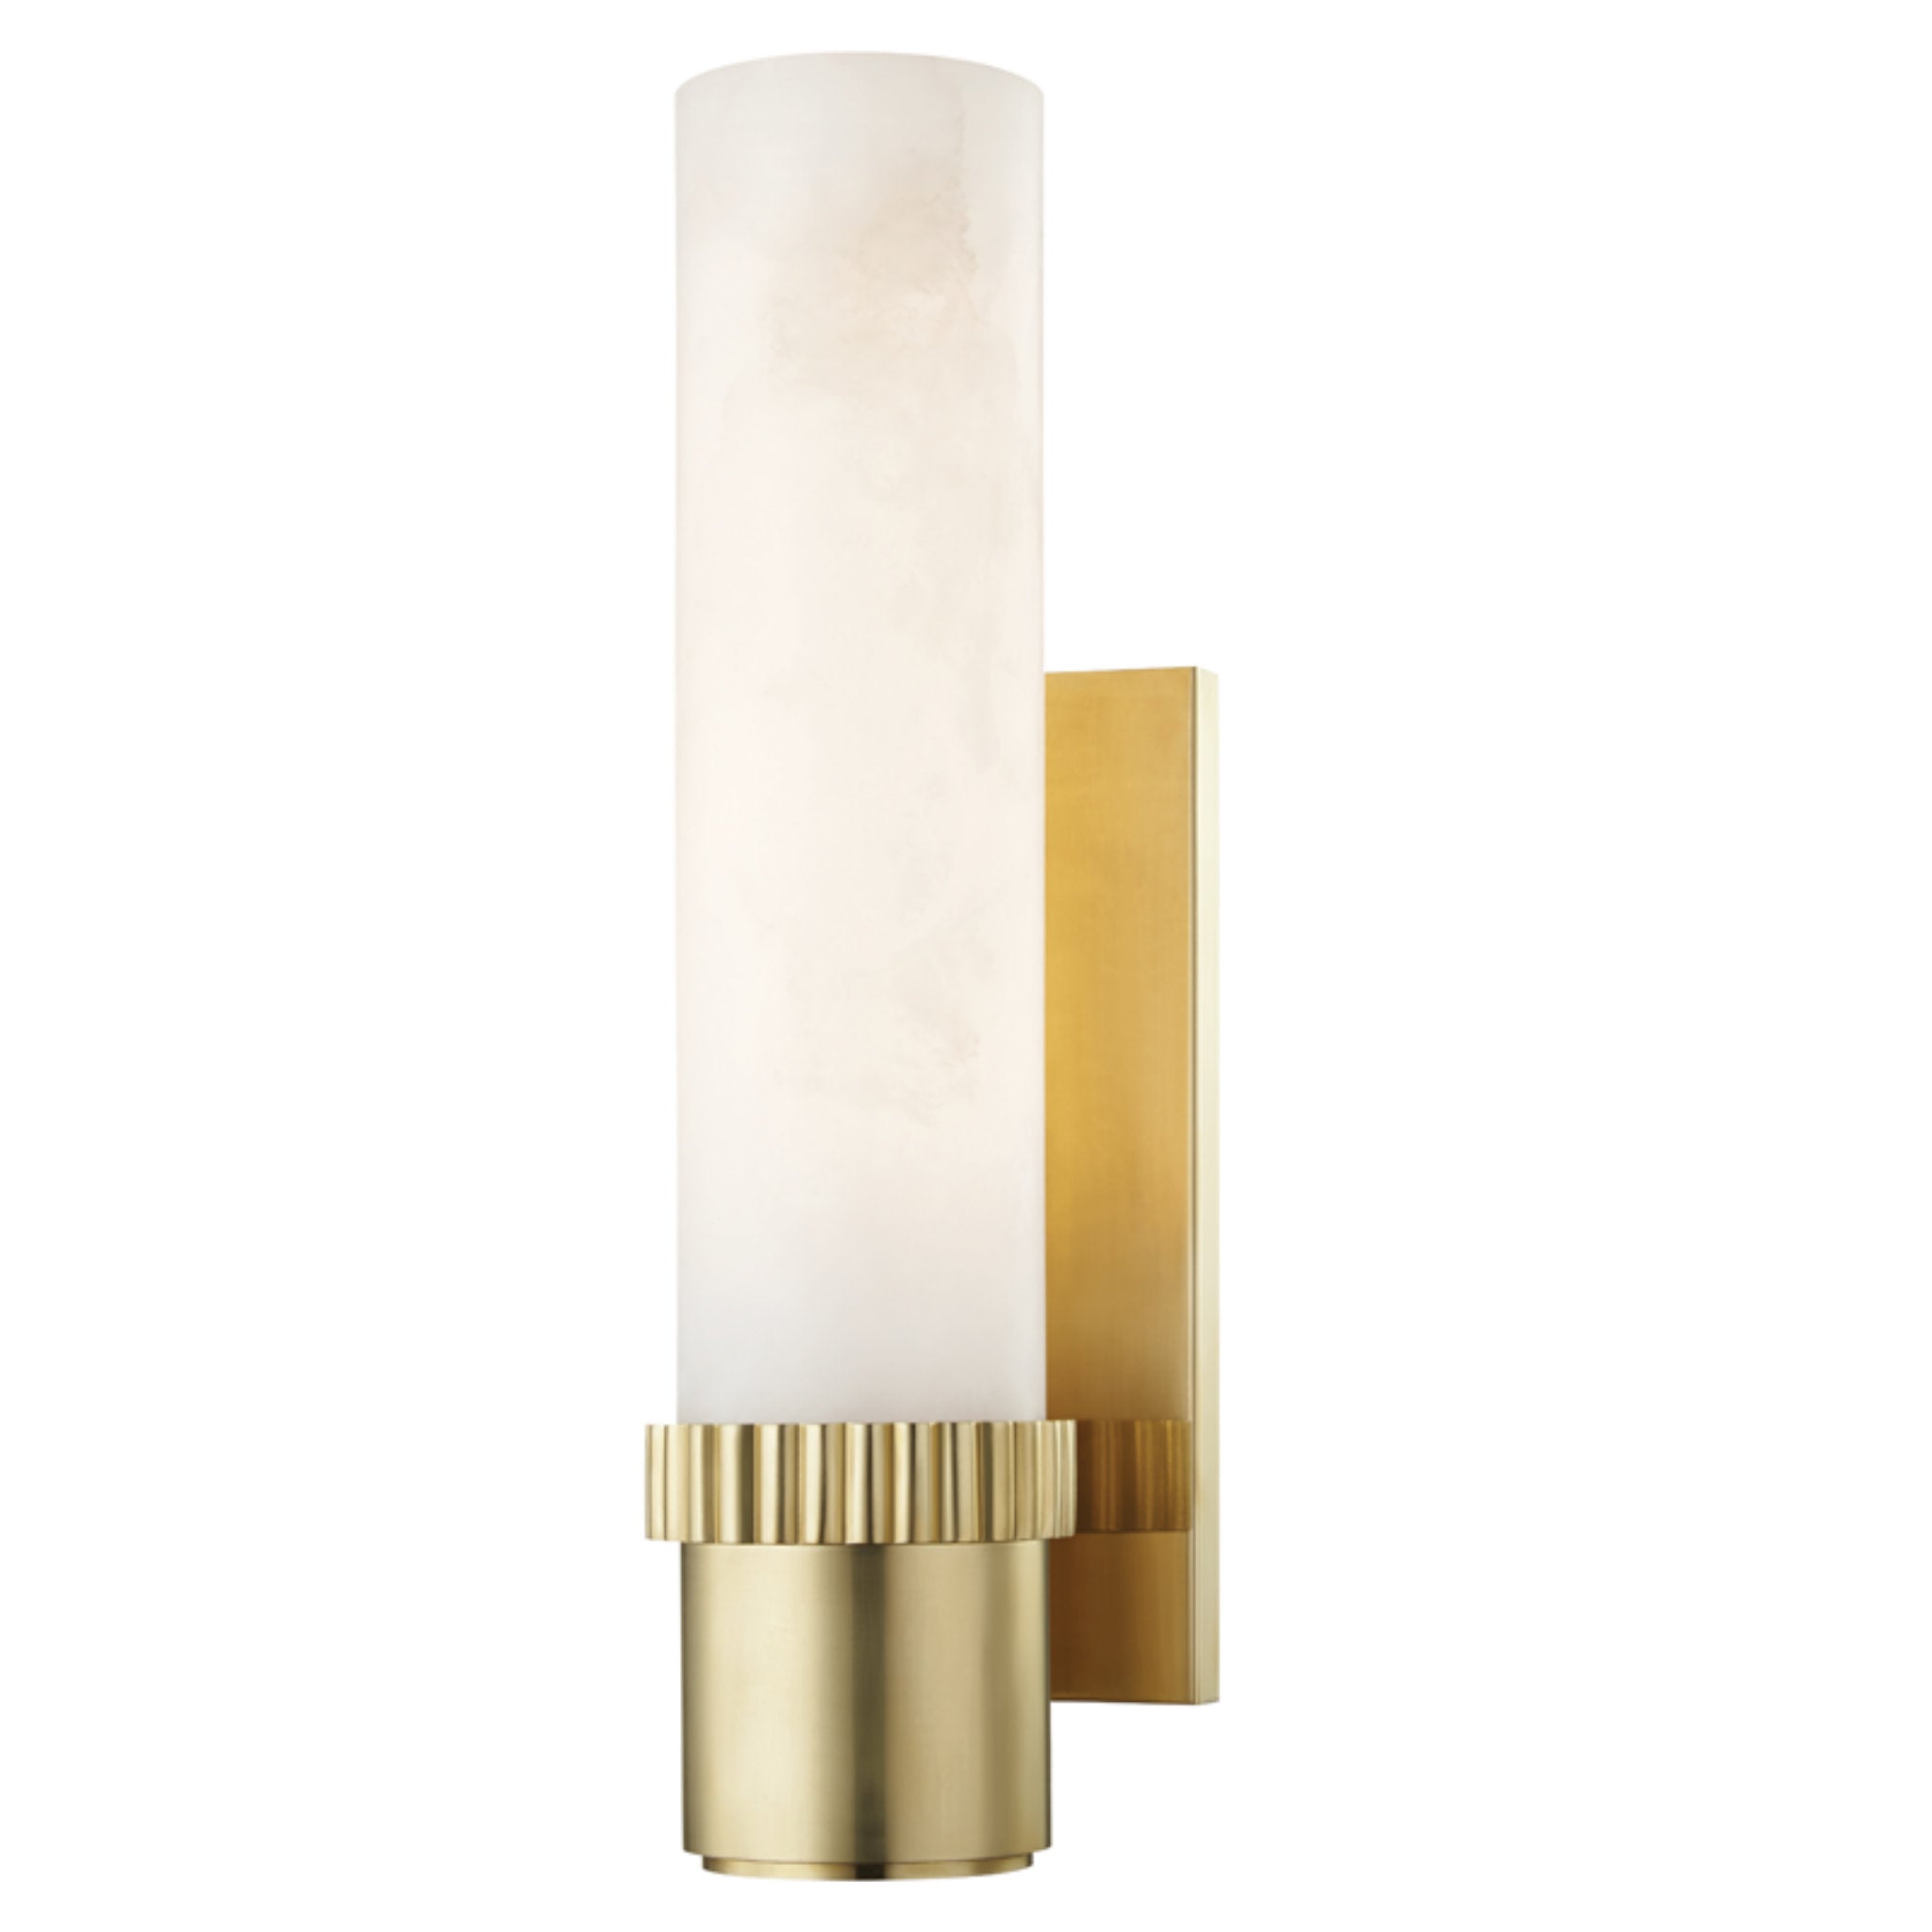 Argon 1 Light Wall Sconce in Aged Brass